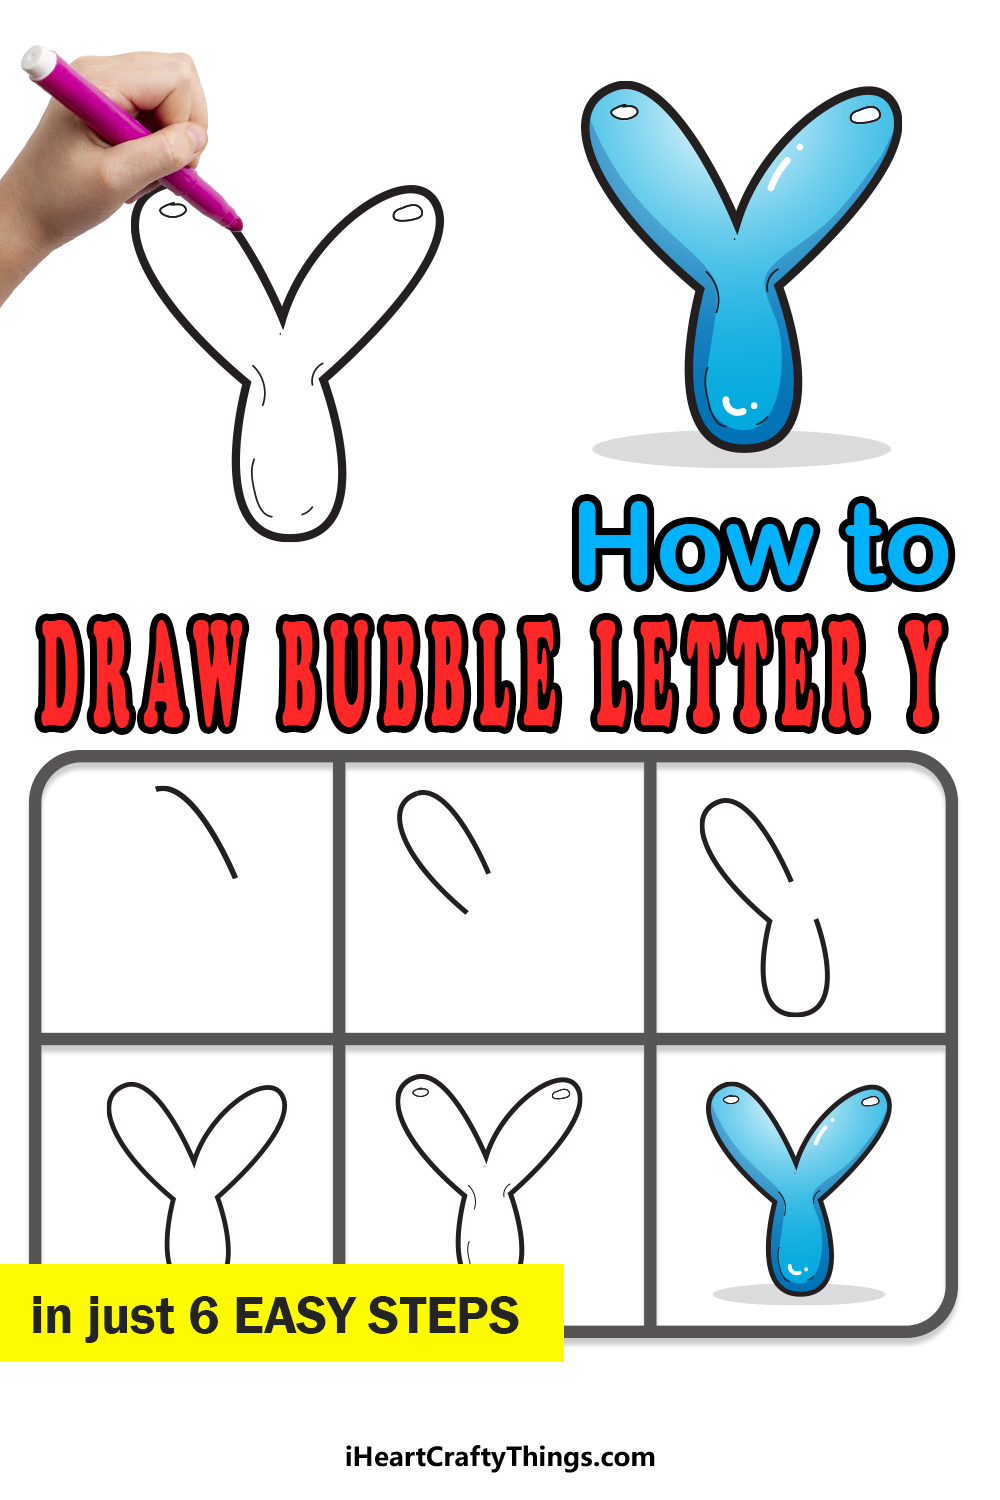 How To Draw Your Own Bubble Y step by step guide